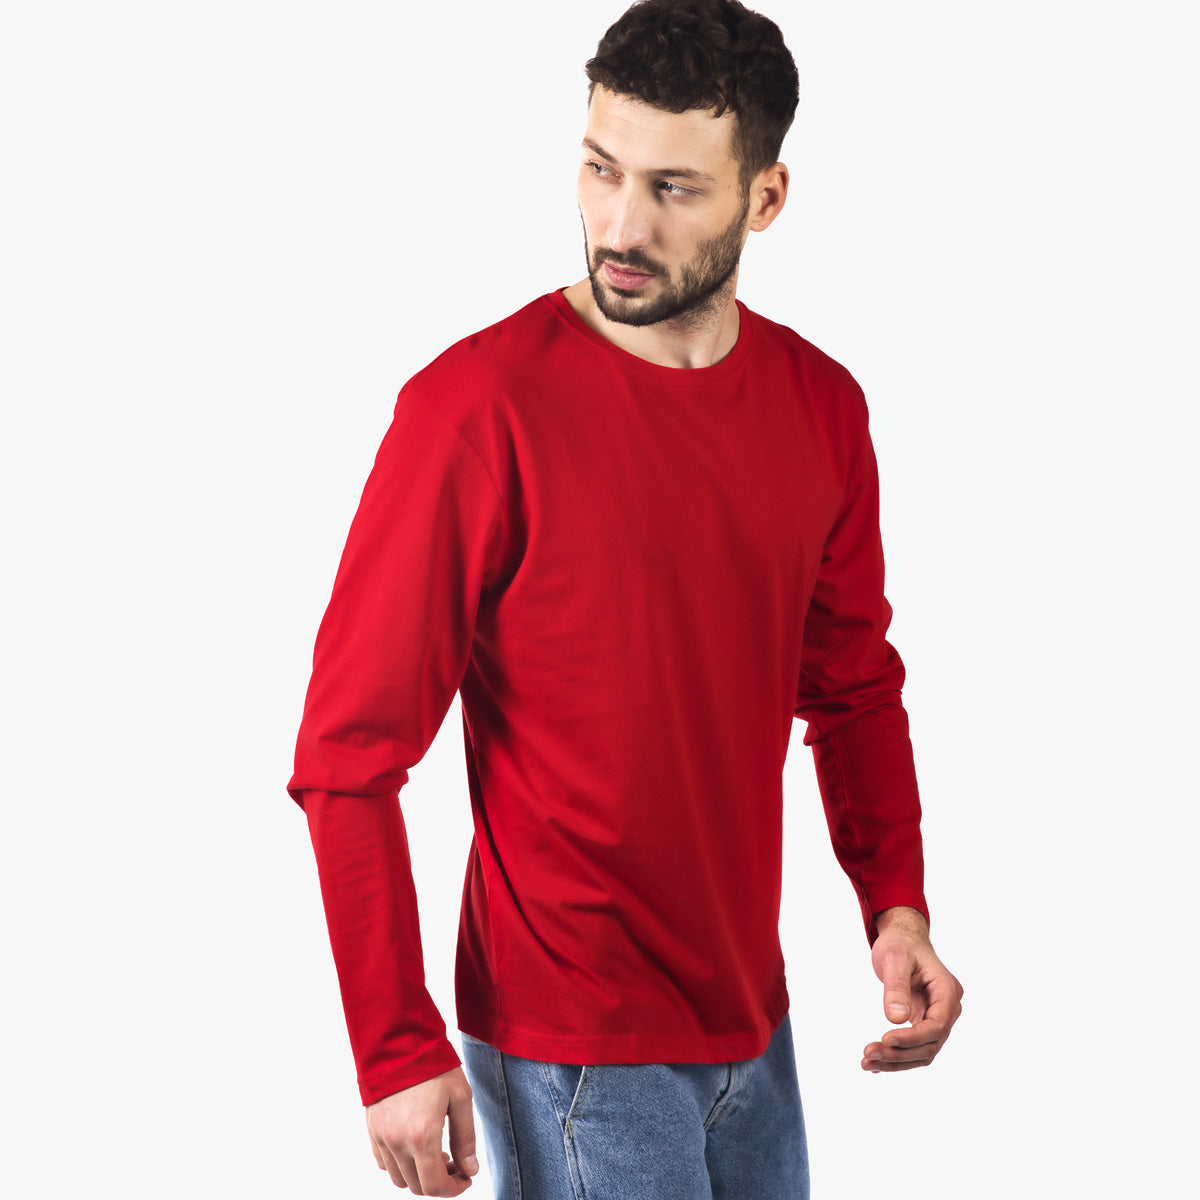 Sustainable clothing Switzerland, long sleeve, langarm, langarm t-shirt, t shirt, t-shirt, herren t-shirt, long tshirt, oversized t shirt, recycled fabric, recycled top, red t-shirt